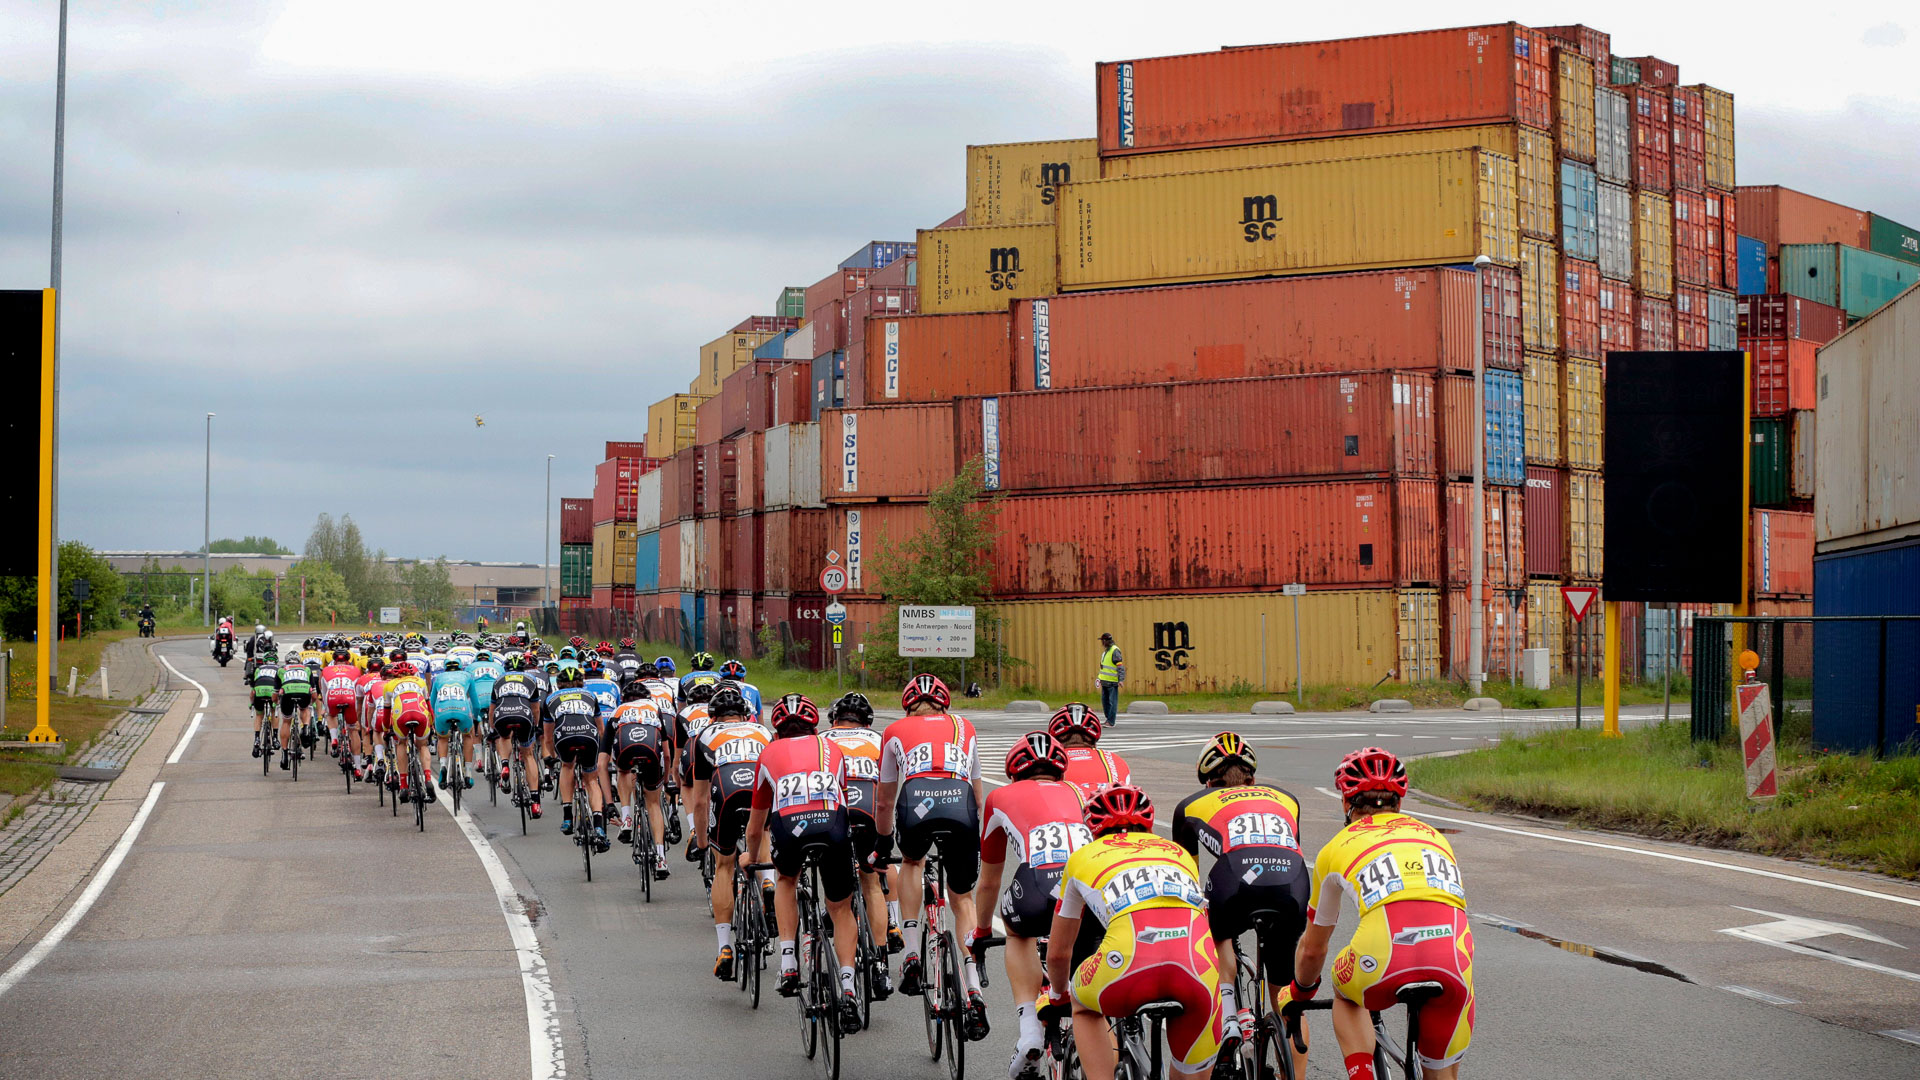 The image shows a bike race passing a tower of shipping containers.